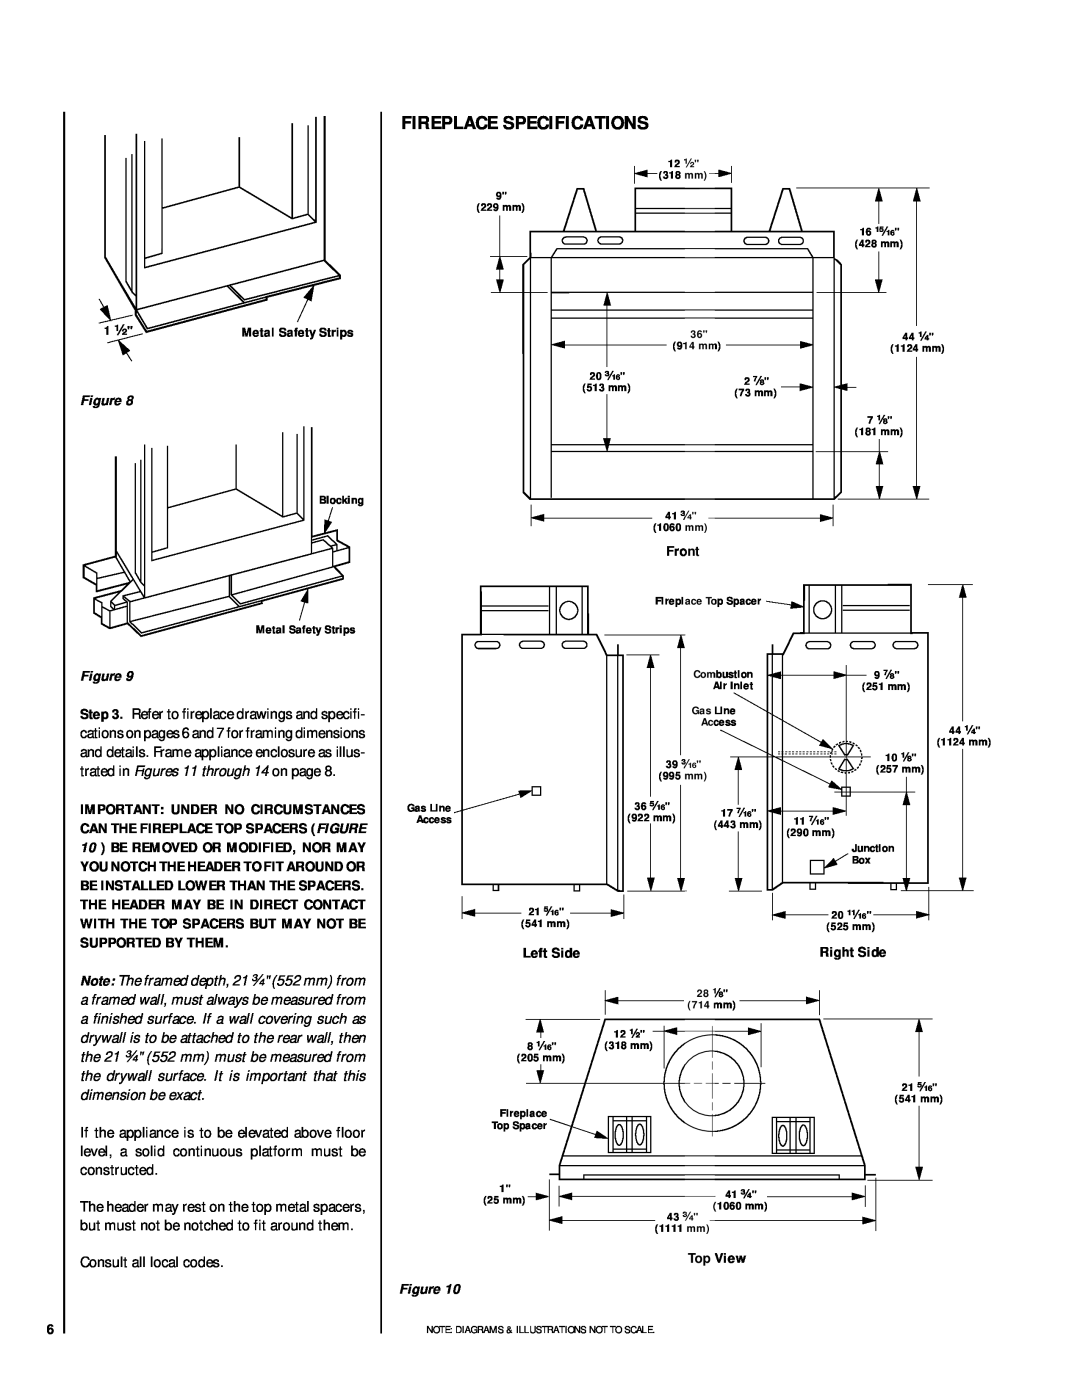 Linksys RDI-36-H HCI-36-H installation instructions Fireplace Specifications, Front, Left Side, Right Side, Top View, 1 ¹⁄₂ 